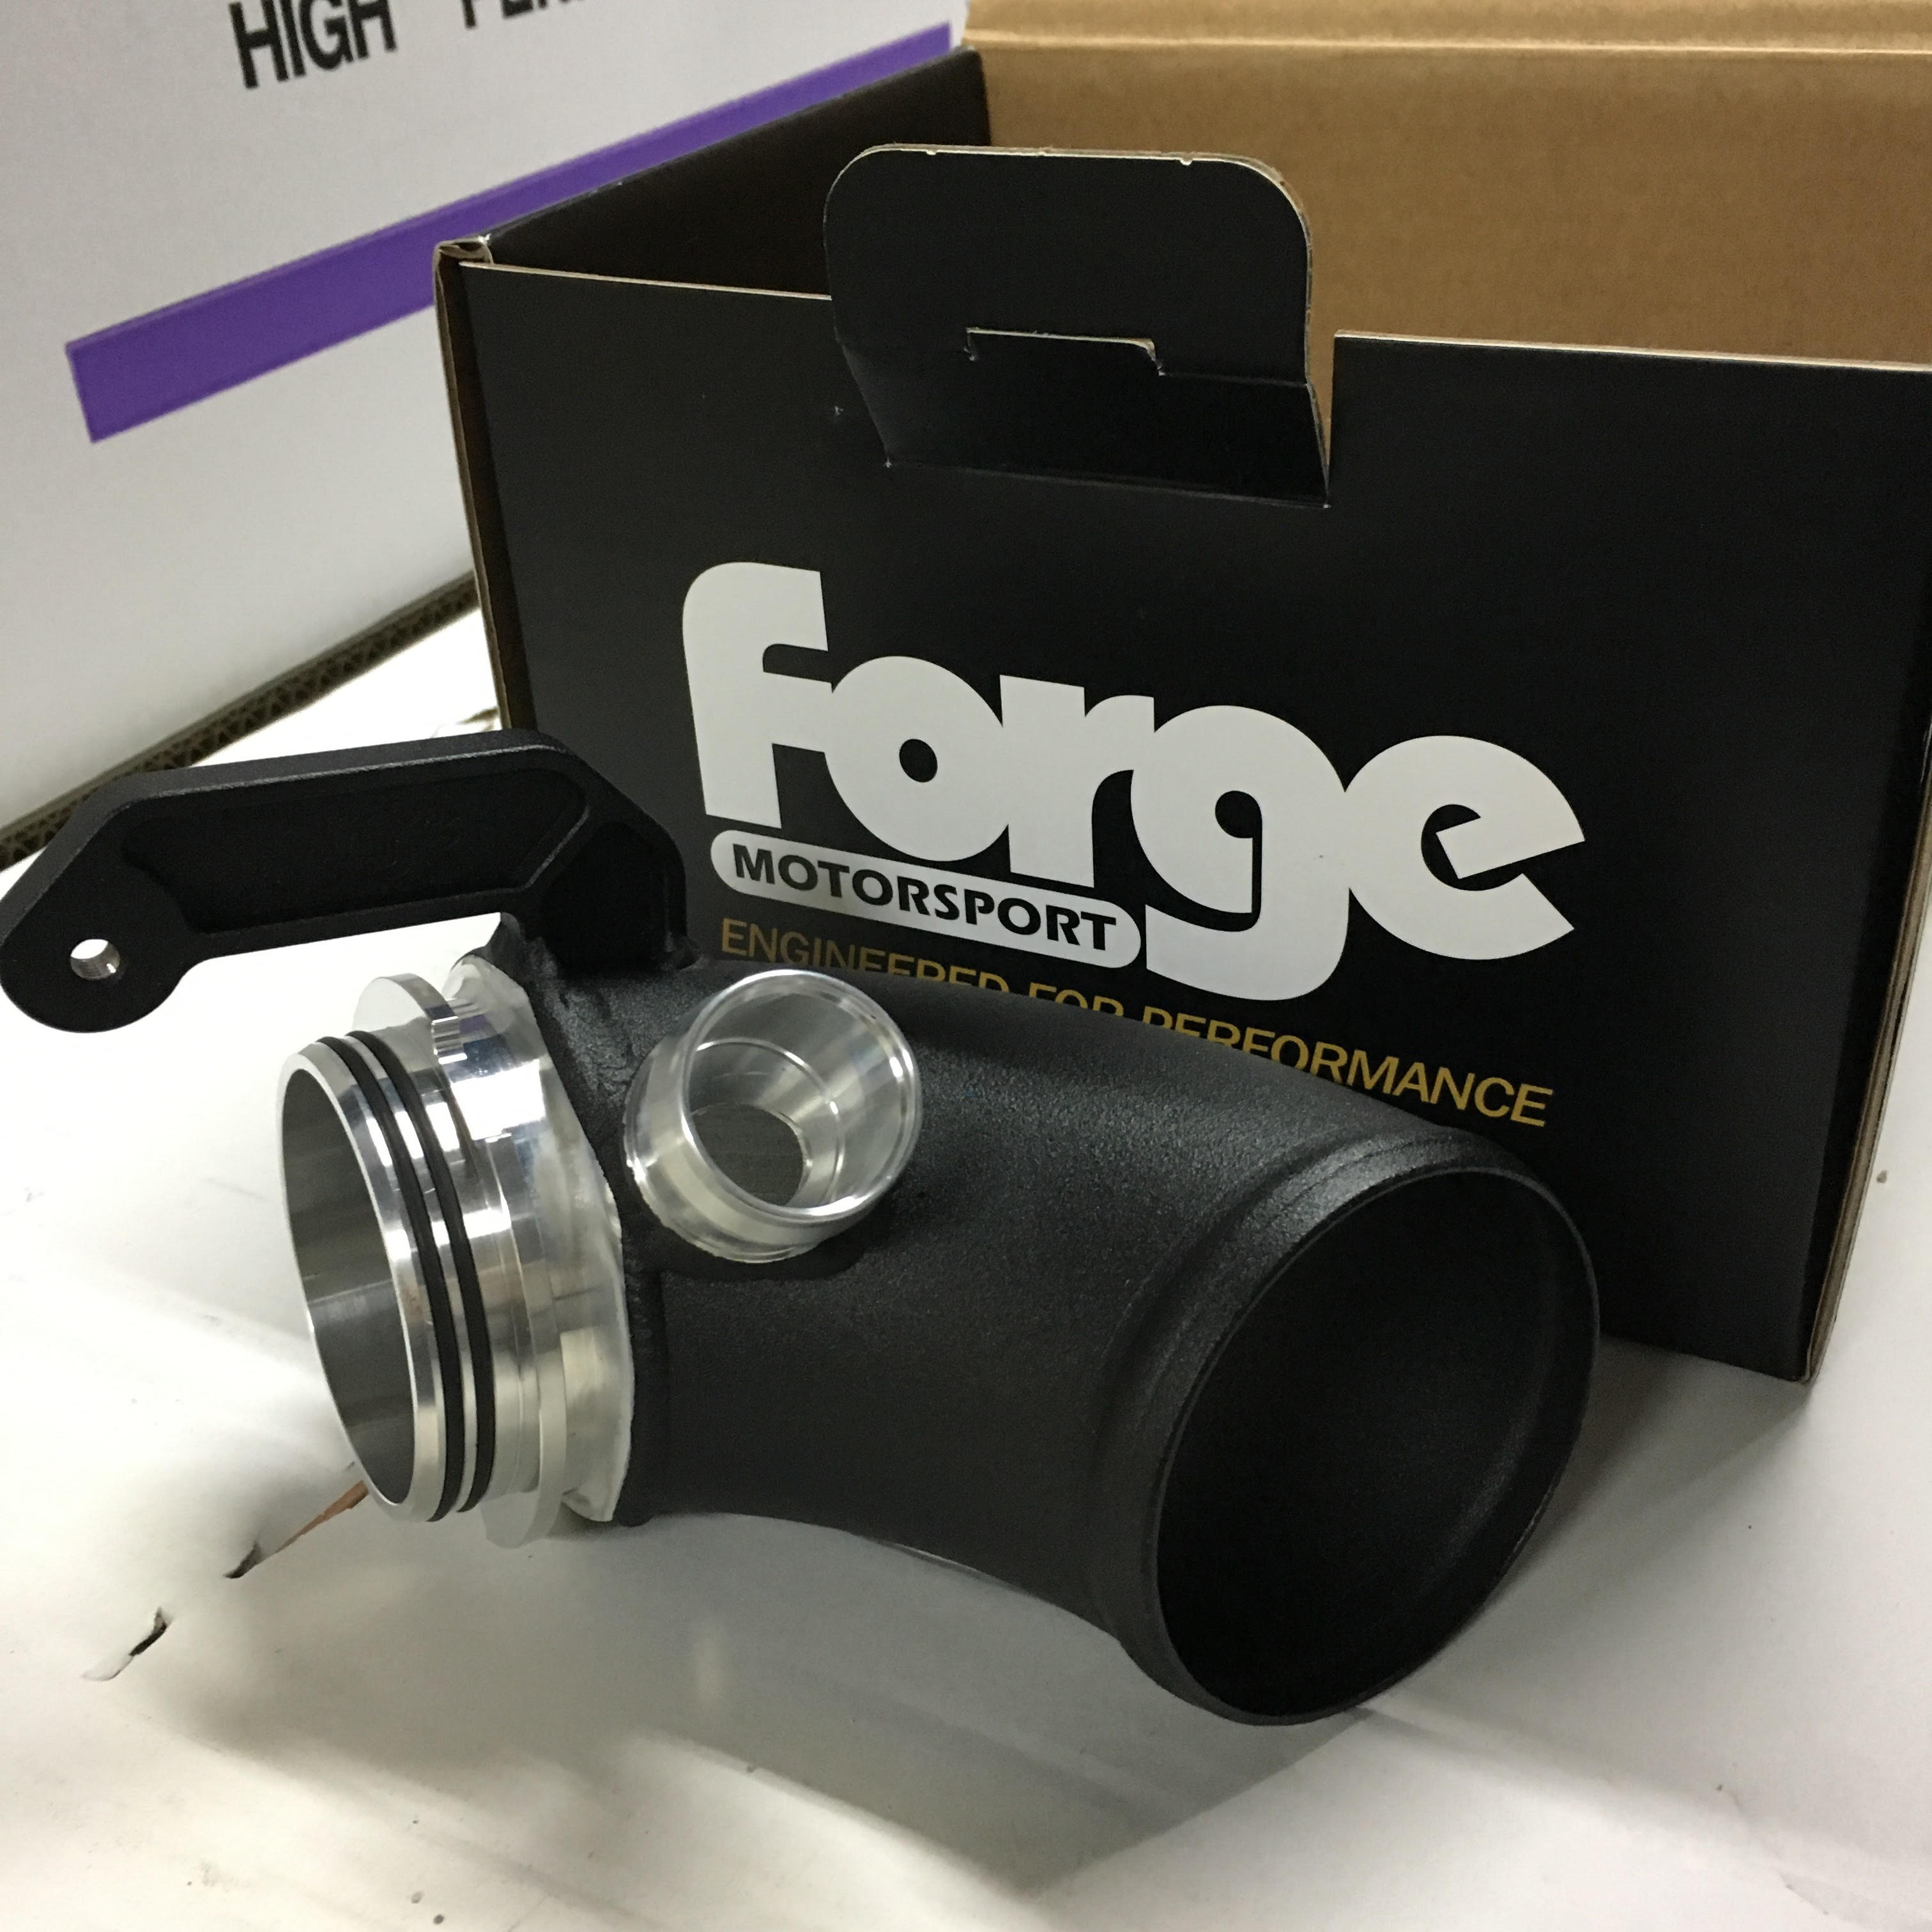 FORGE FMTIA1 Alloy Turbo Inlet Adaptor for VW Golf 7 GTI, Golf 7 Clubsport, Golf 7.5 GTI, Golf 7 R, Golf 7.5 R, AUDI S3 (8V) Photo-2 